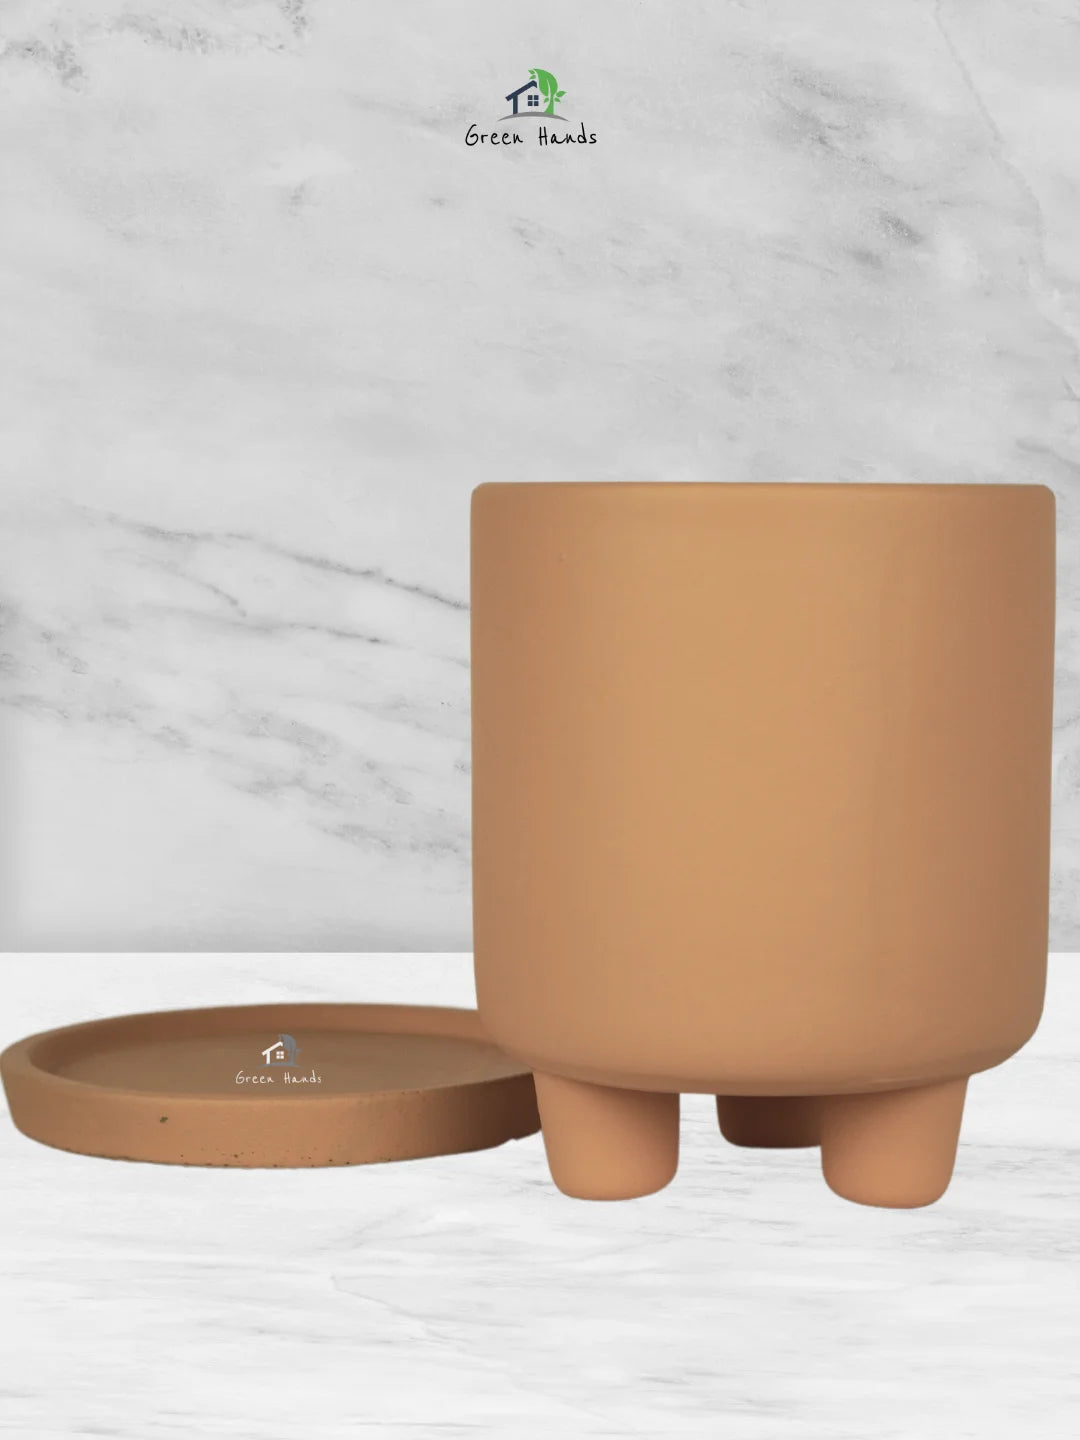 Tripod Pot: Hand-Cast Terracotta Planters for a Sustainable, Stylish Home